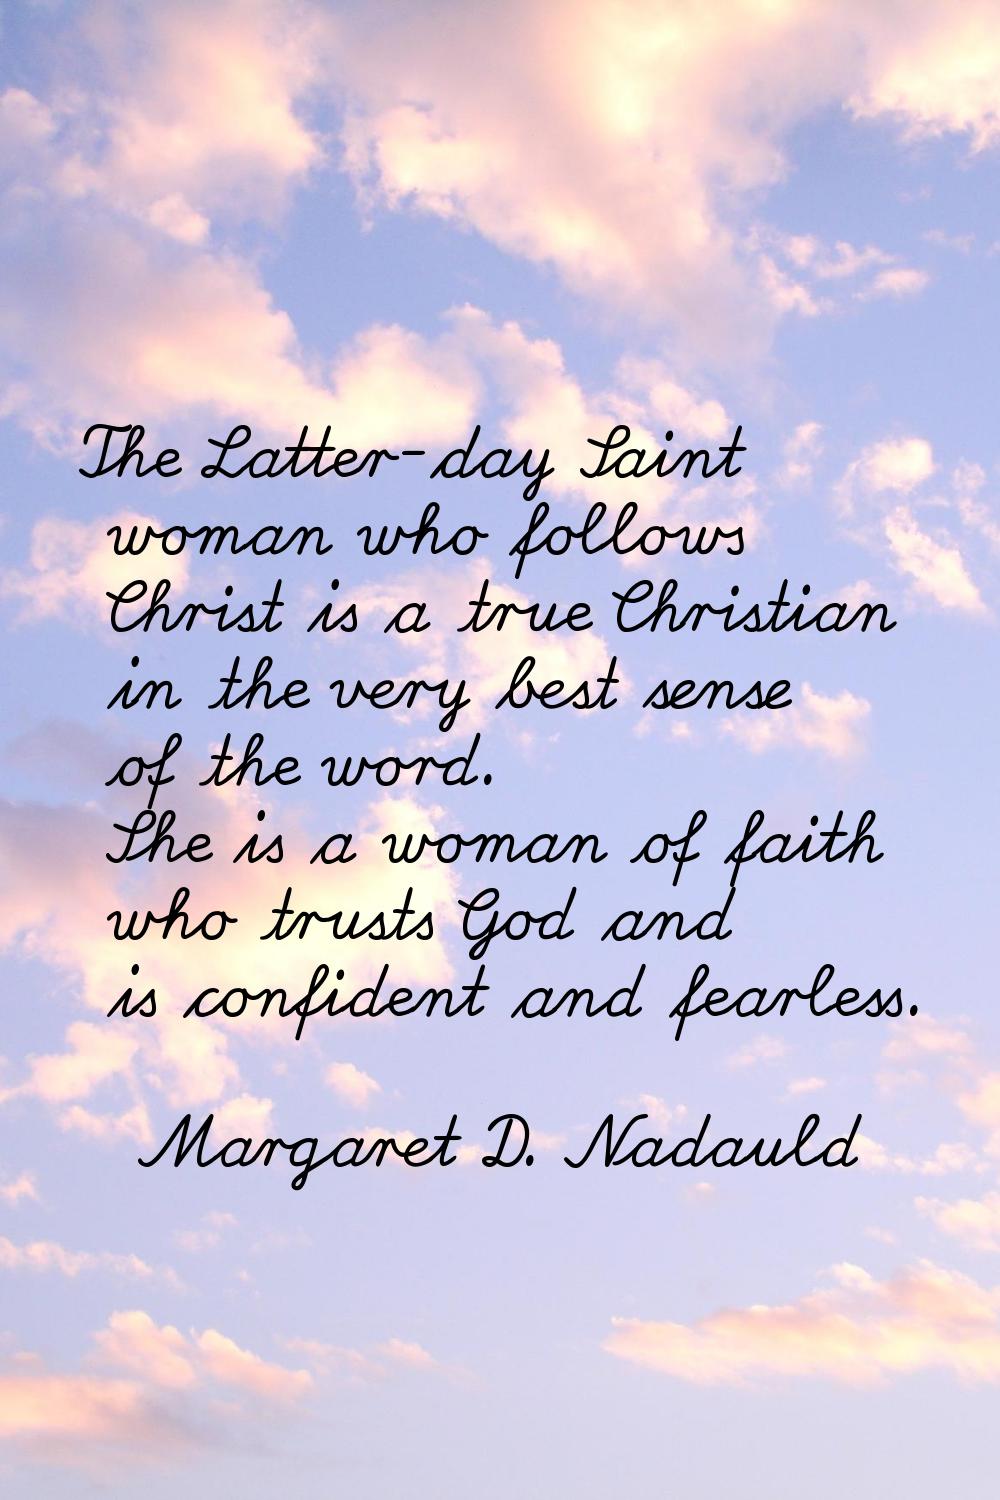 The Latter-day Saint woman who follows Christ is a true Christian in the very best sense of the wor